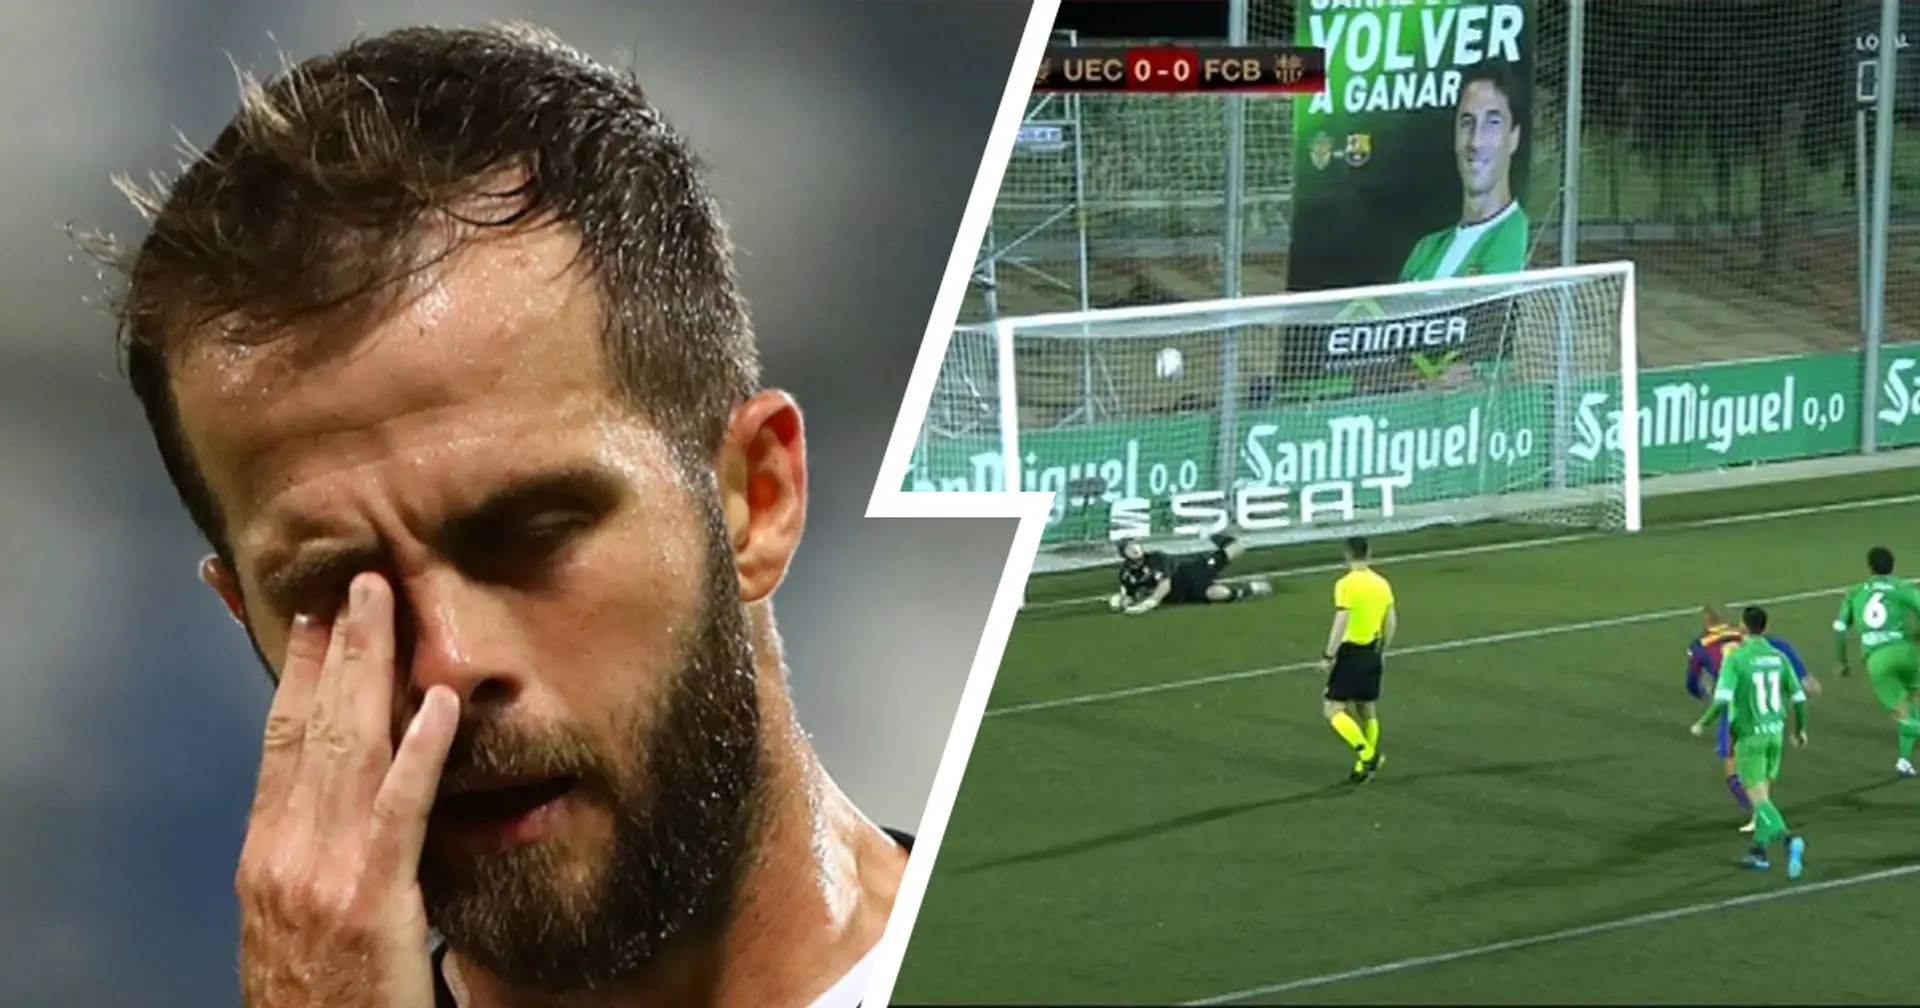 Pjanic misses penalty for first time in his club career vs Cornella